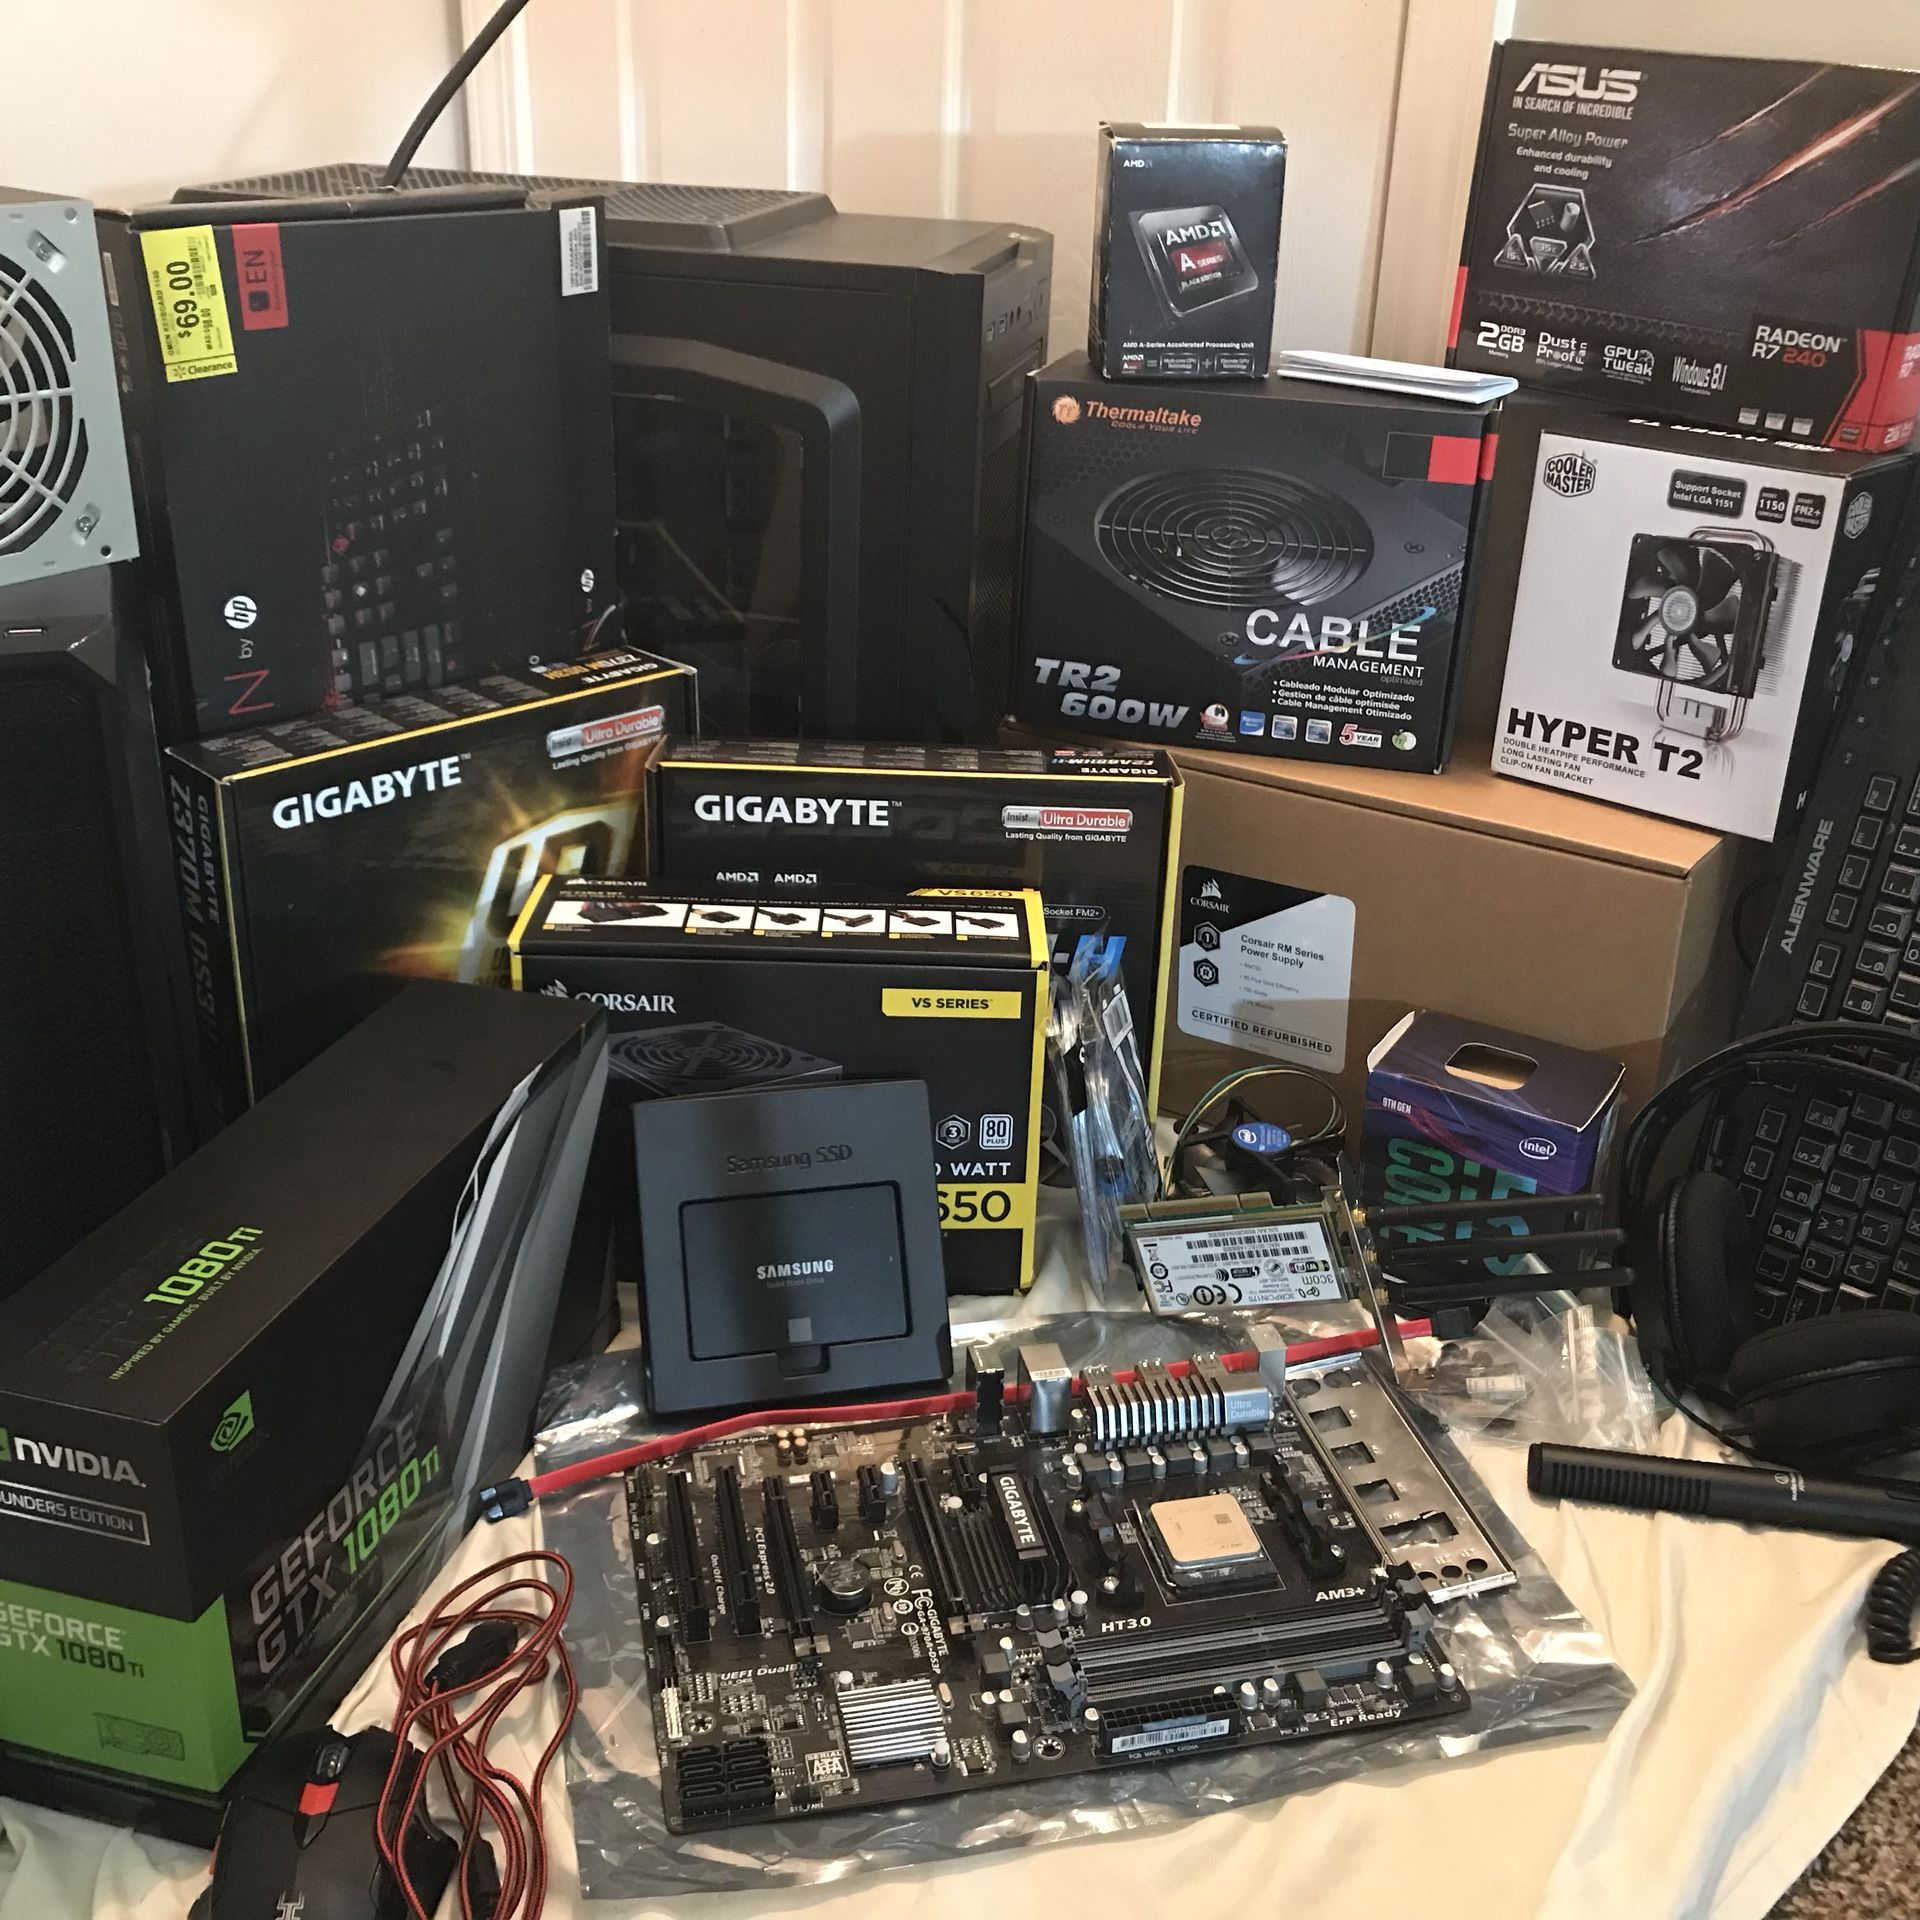 LOTS COMPUTER STUFF AND 3 GAMING PC'S